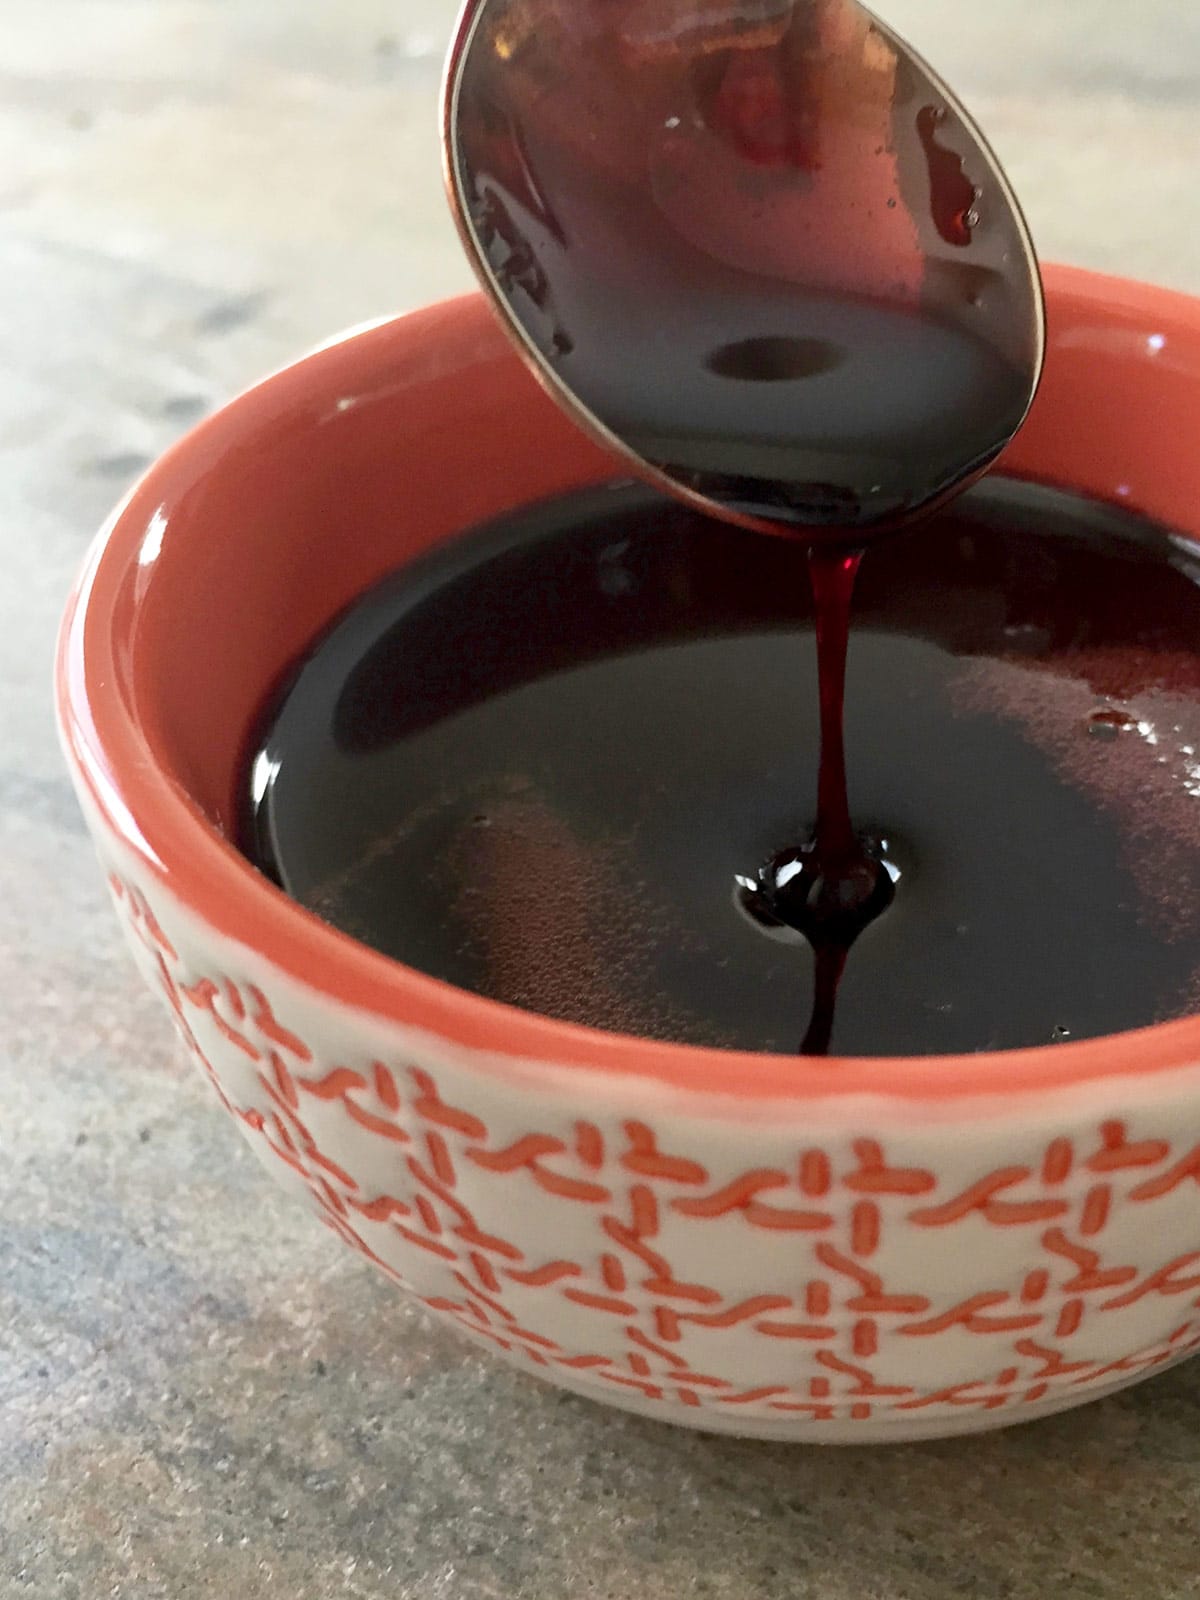 Dark syrupy pomegranate molasses dripping off of a spoon into an orange bowl.